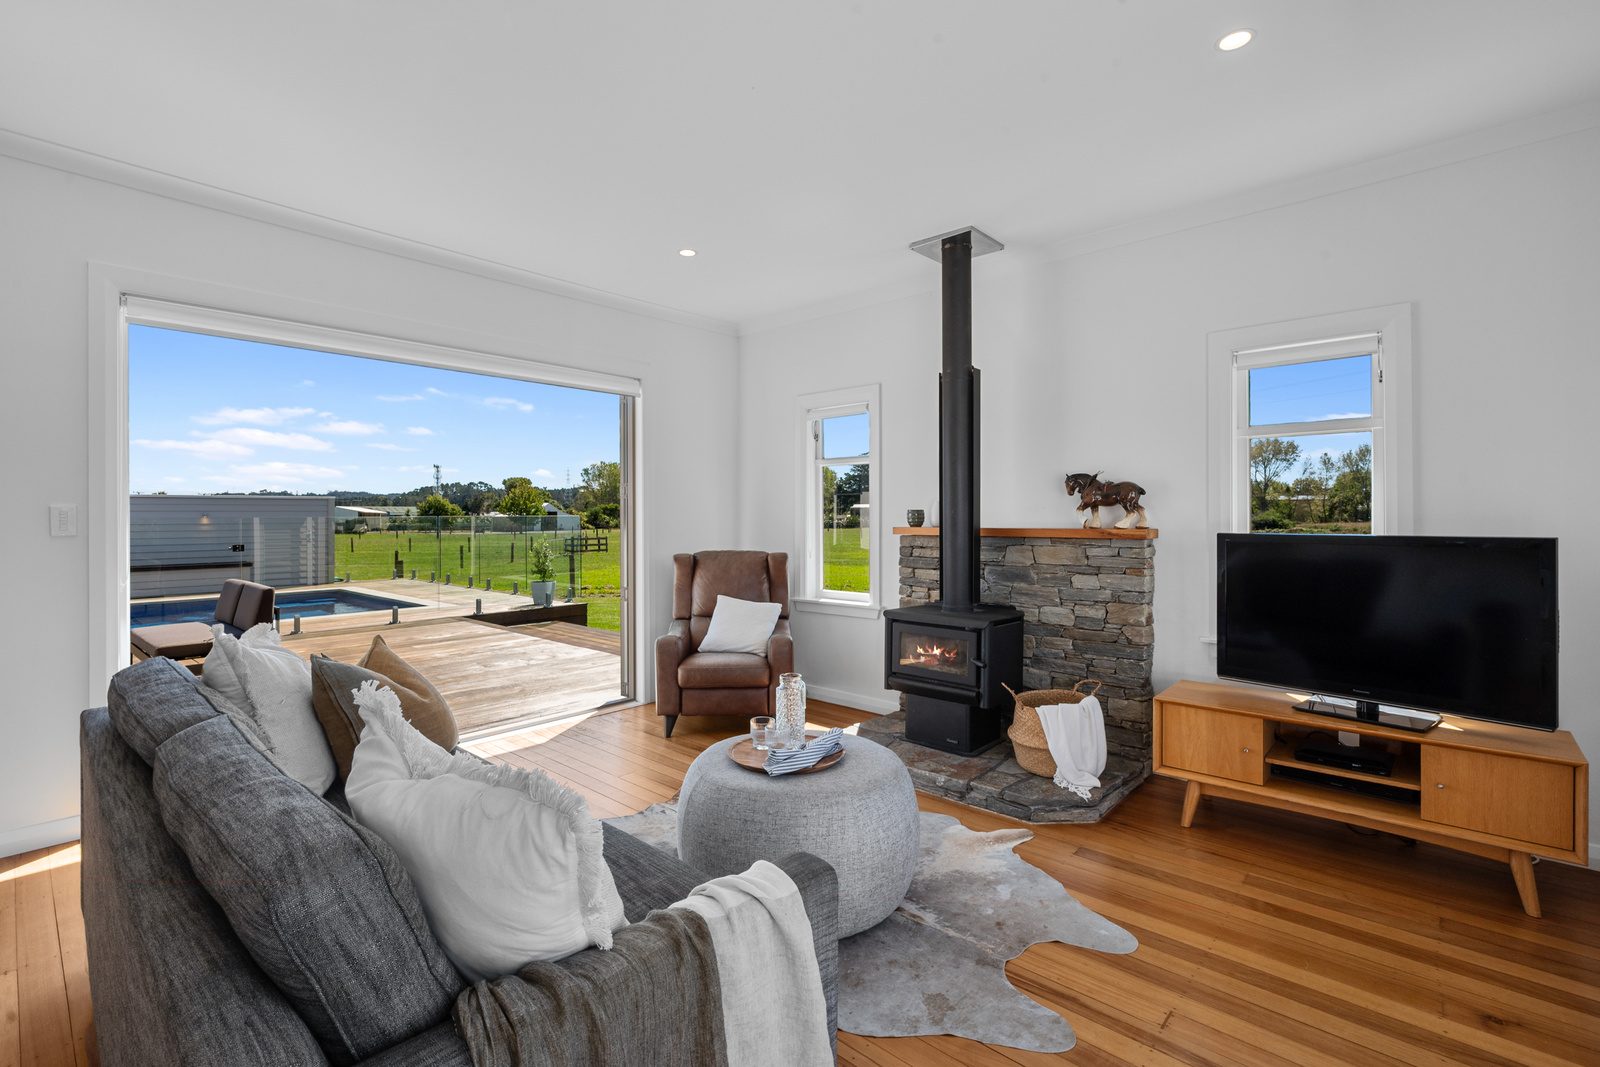 Lounge with TV, fireplace and sofa with open doors overlooking pool and paddocks.